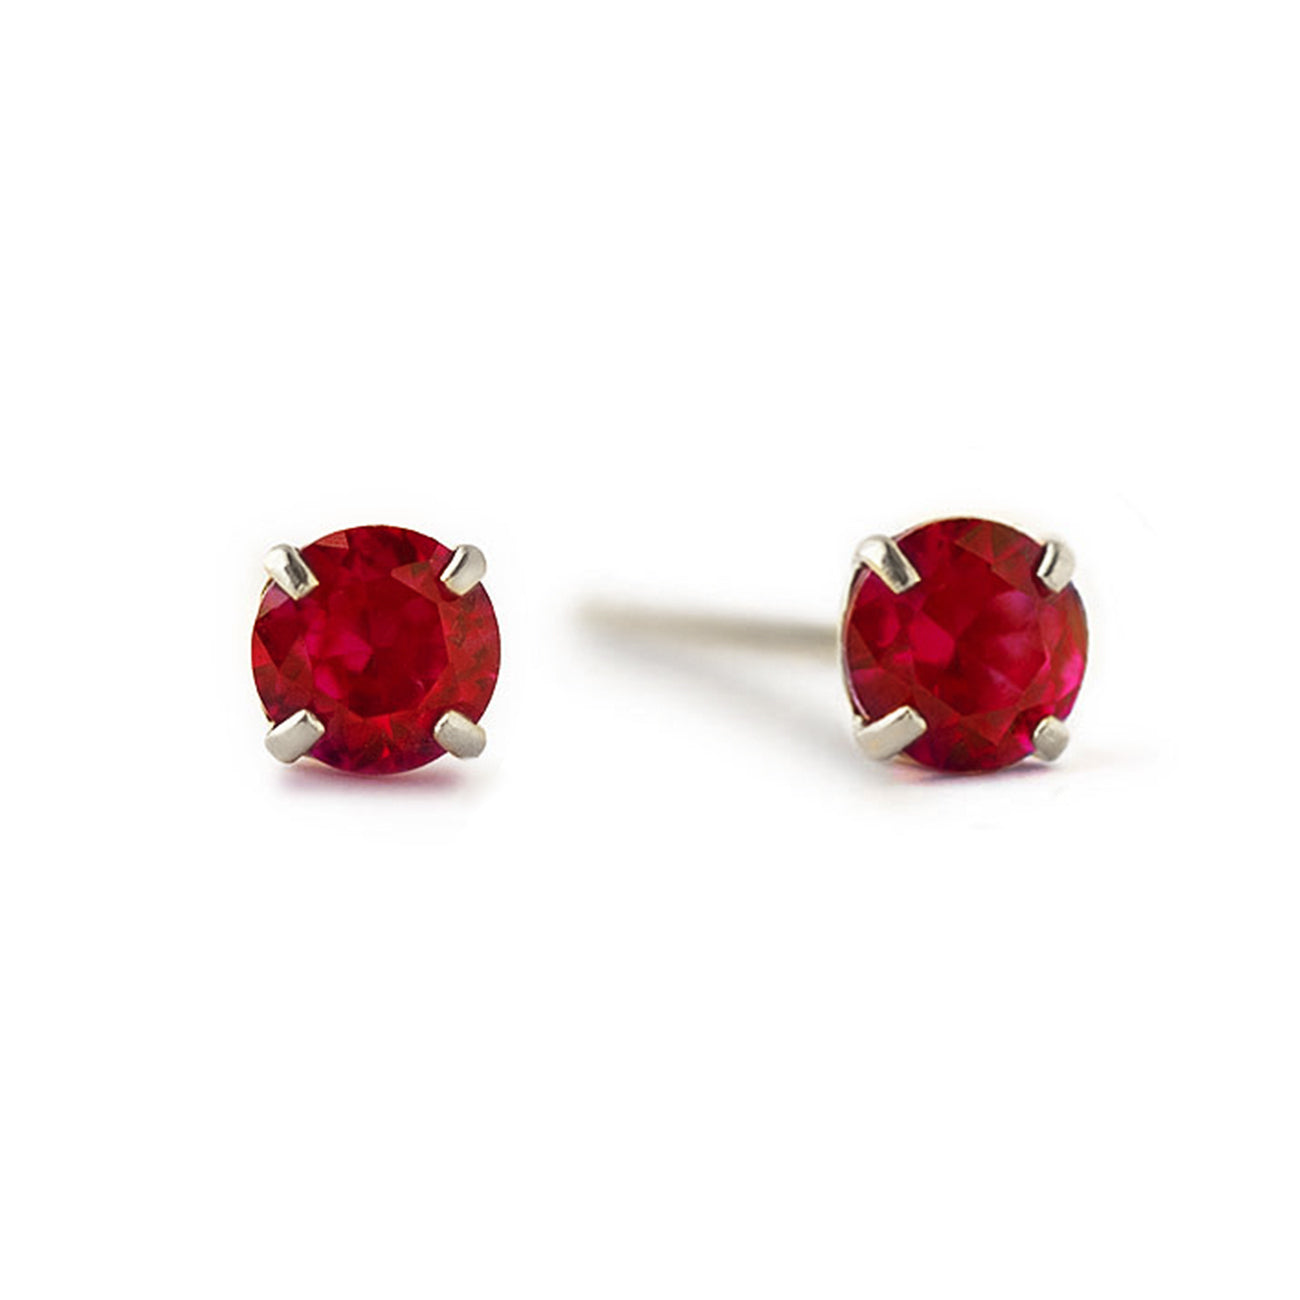 Only 45.00 usd for Birthstone Studs Garnet Online at the Shop